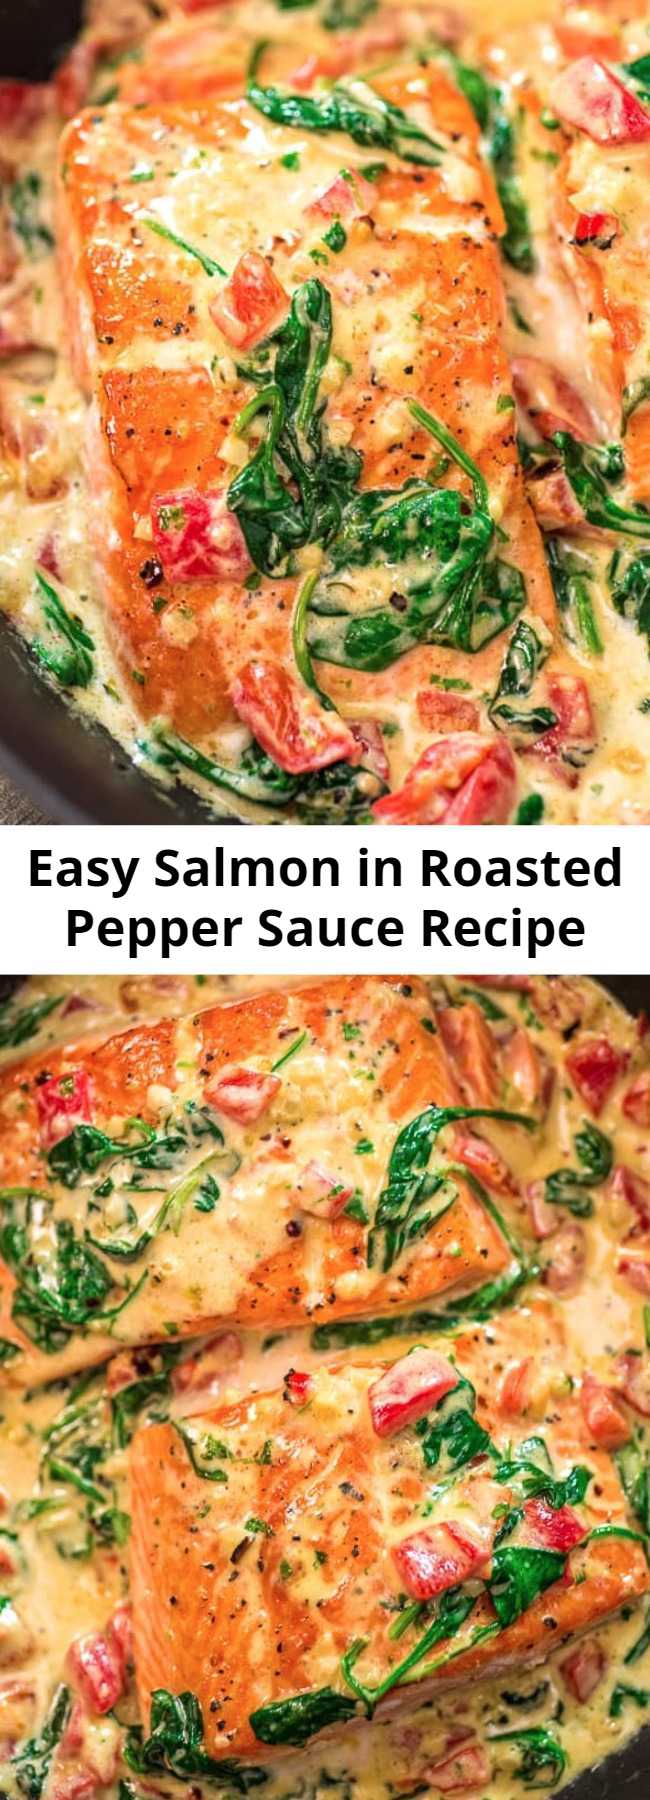 Easy Salmon in Roasted Pepper Sauce Recipe - This Salmon in Roasted Pepper Sauce makes an absolutely scrumptious meal, worthy of a special occasion. Make this easy one-pan dinner in just 20 minutes! #salmon #dinner #fish #seafood #keto #recipeoftheday